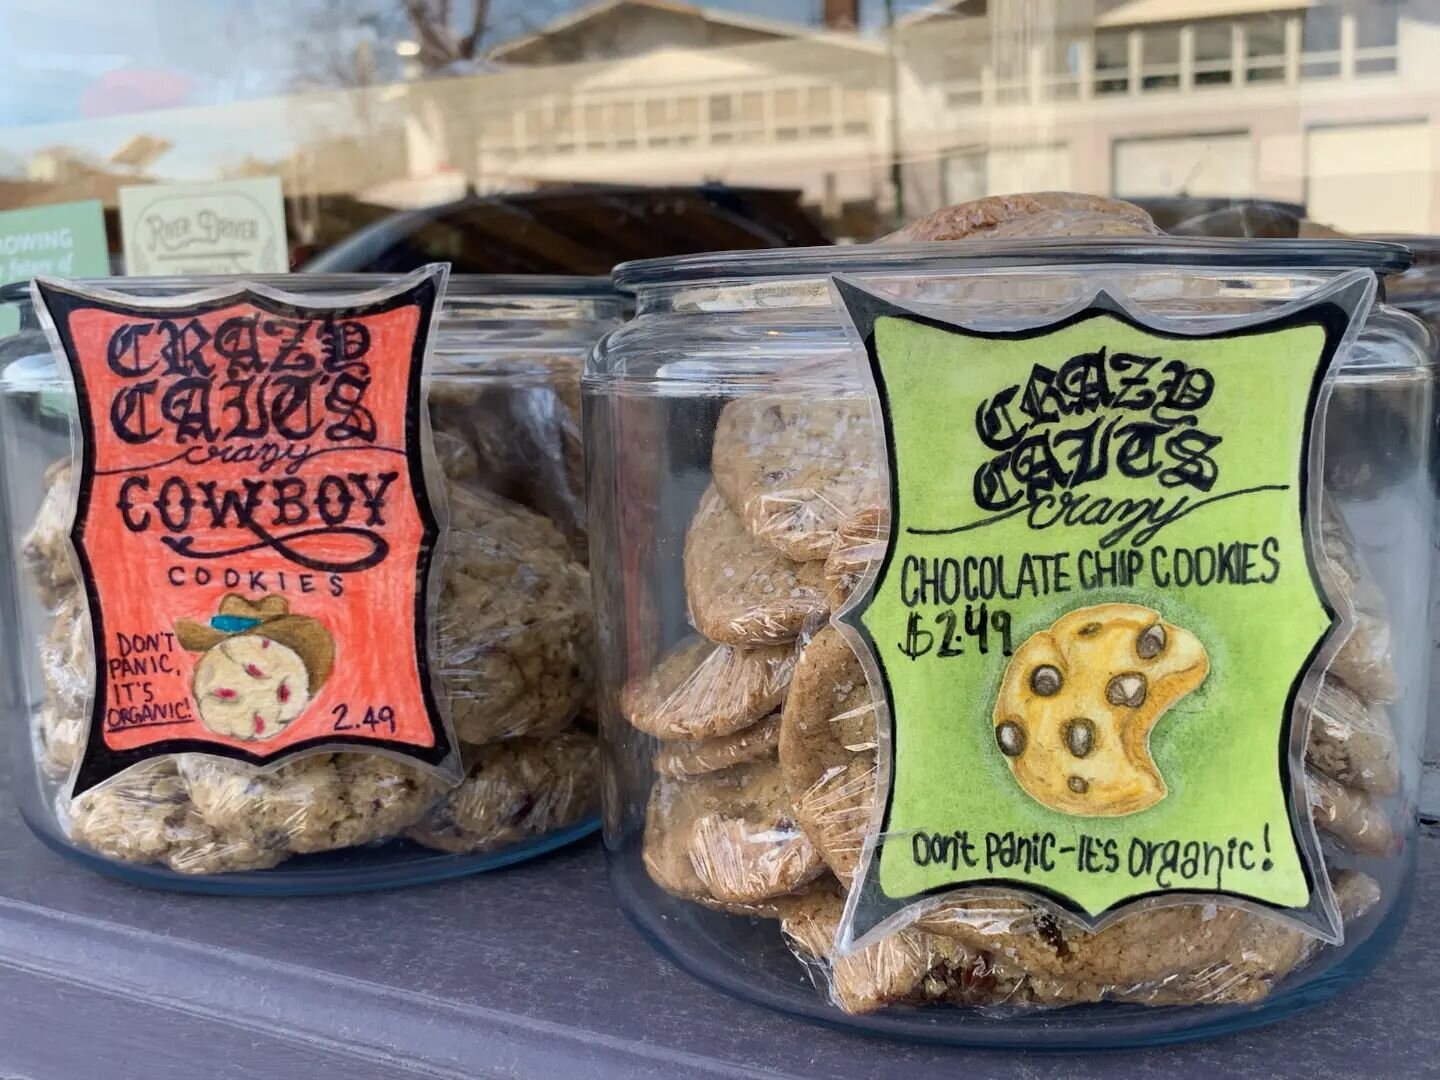 Fresh baked @crazycaitsconfections 🍪 🍪 
&quot;Don't panic, it's organic!&quot;
These are a must try!